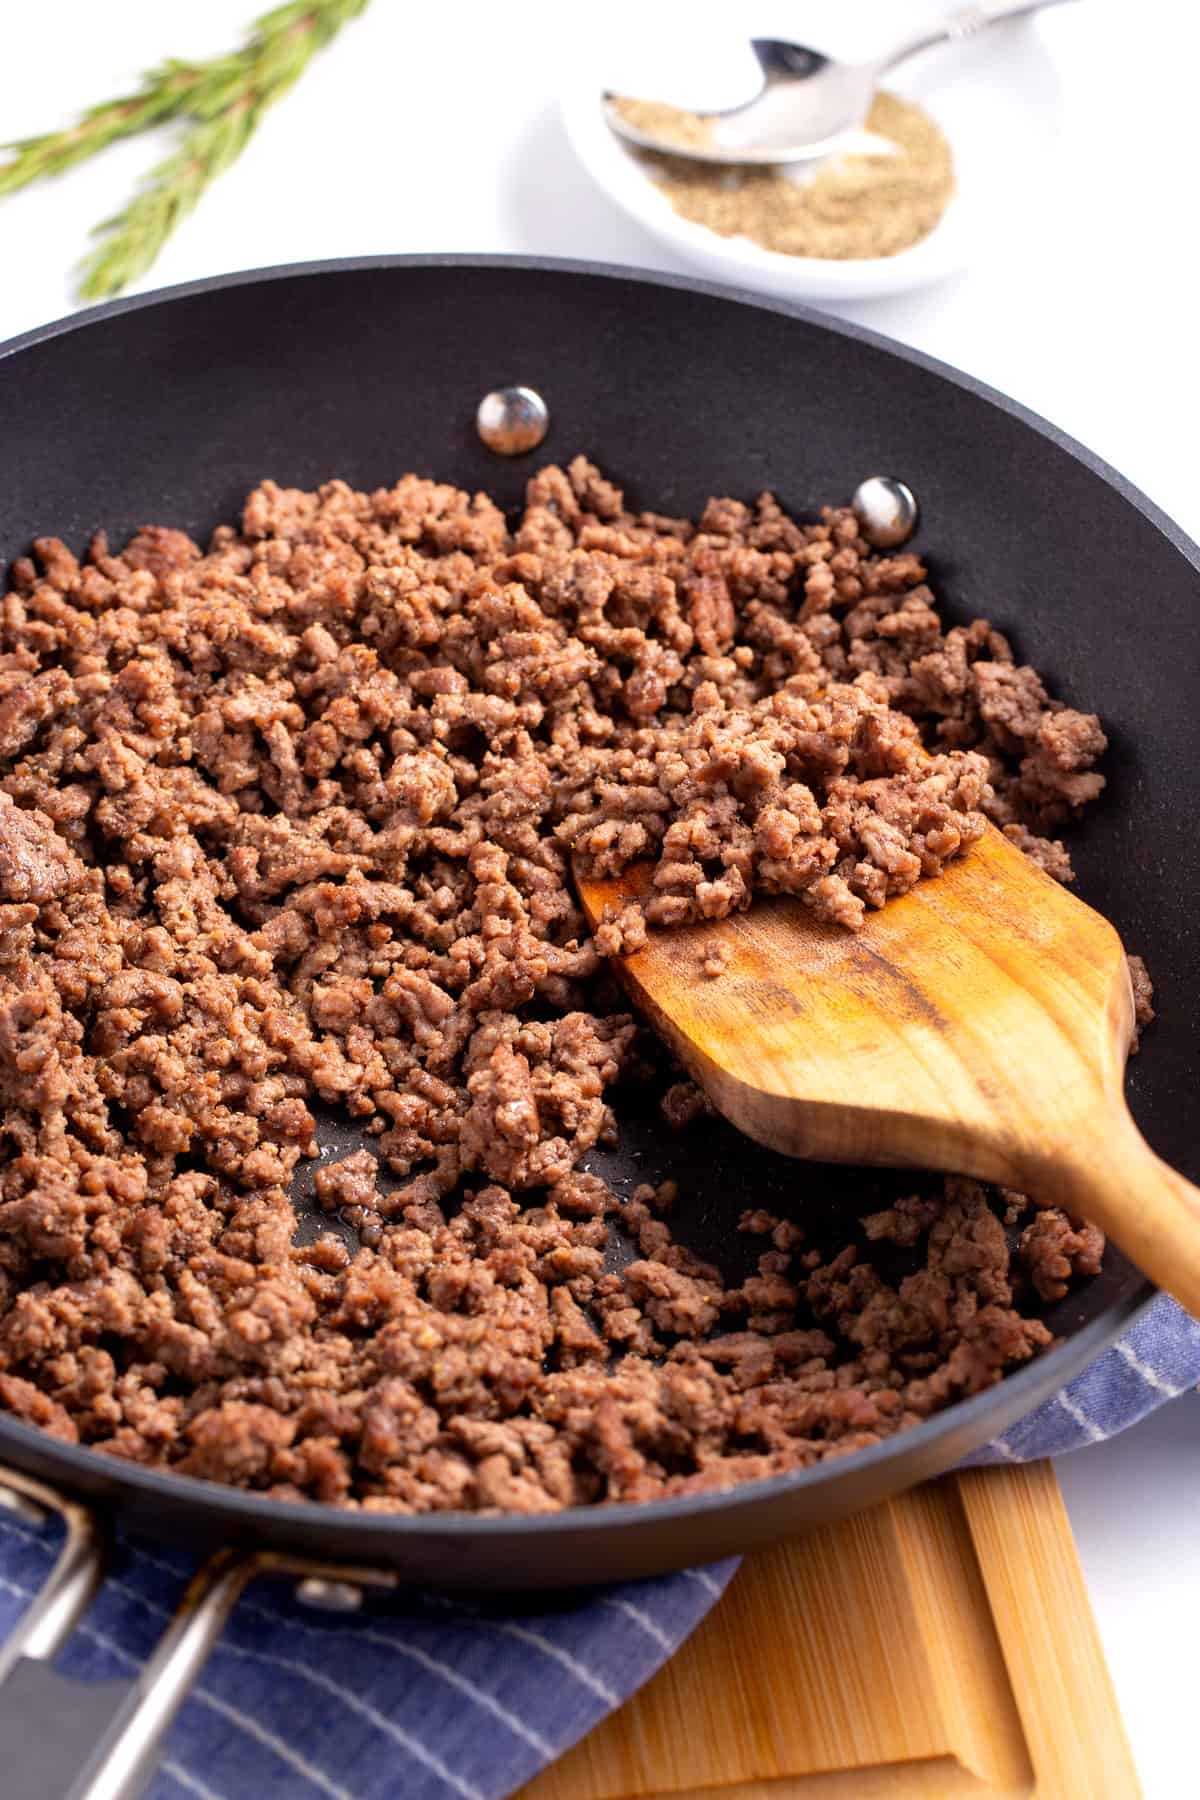 How To Brown Ground Beef For All Recipes - All Things Mamma